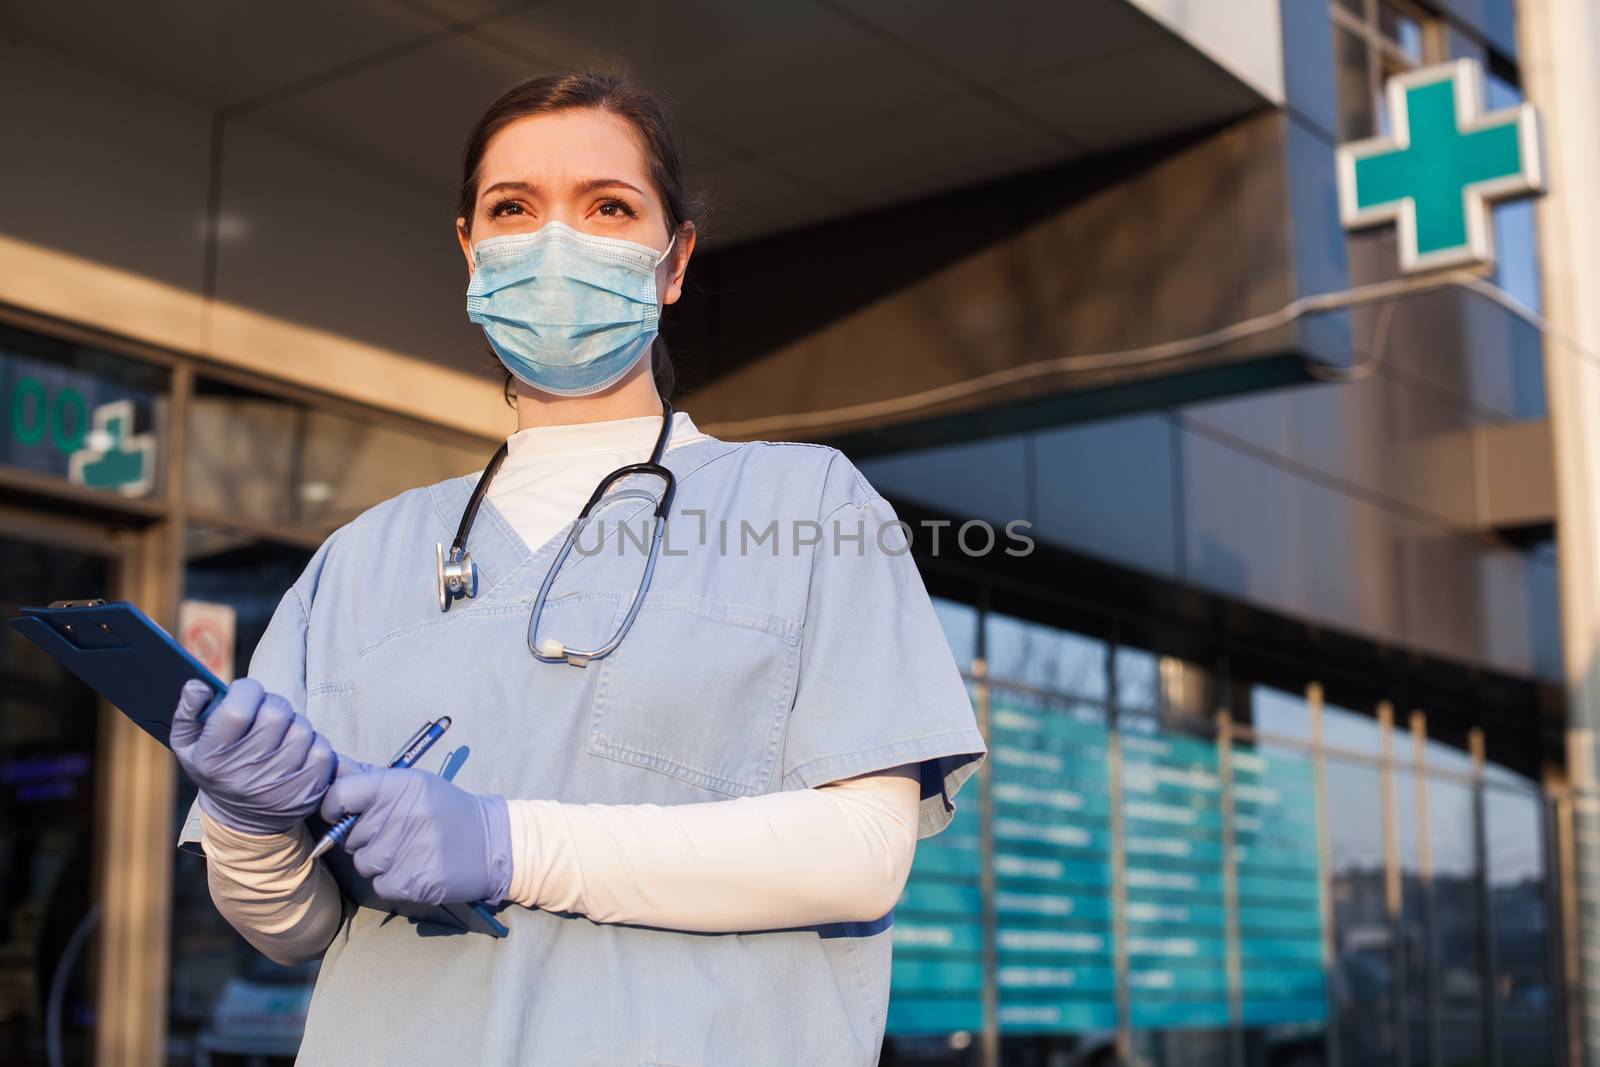 Young female doctor standing in front of healthcare facility, wearing protective face mask and PPE equipment, holding medical patient clipboard, COVID-19 pandemic crisis by Plyushkin